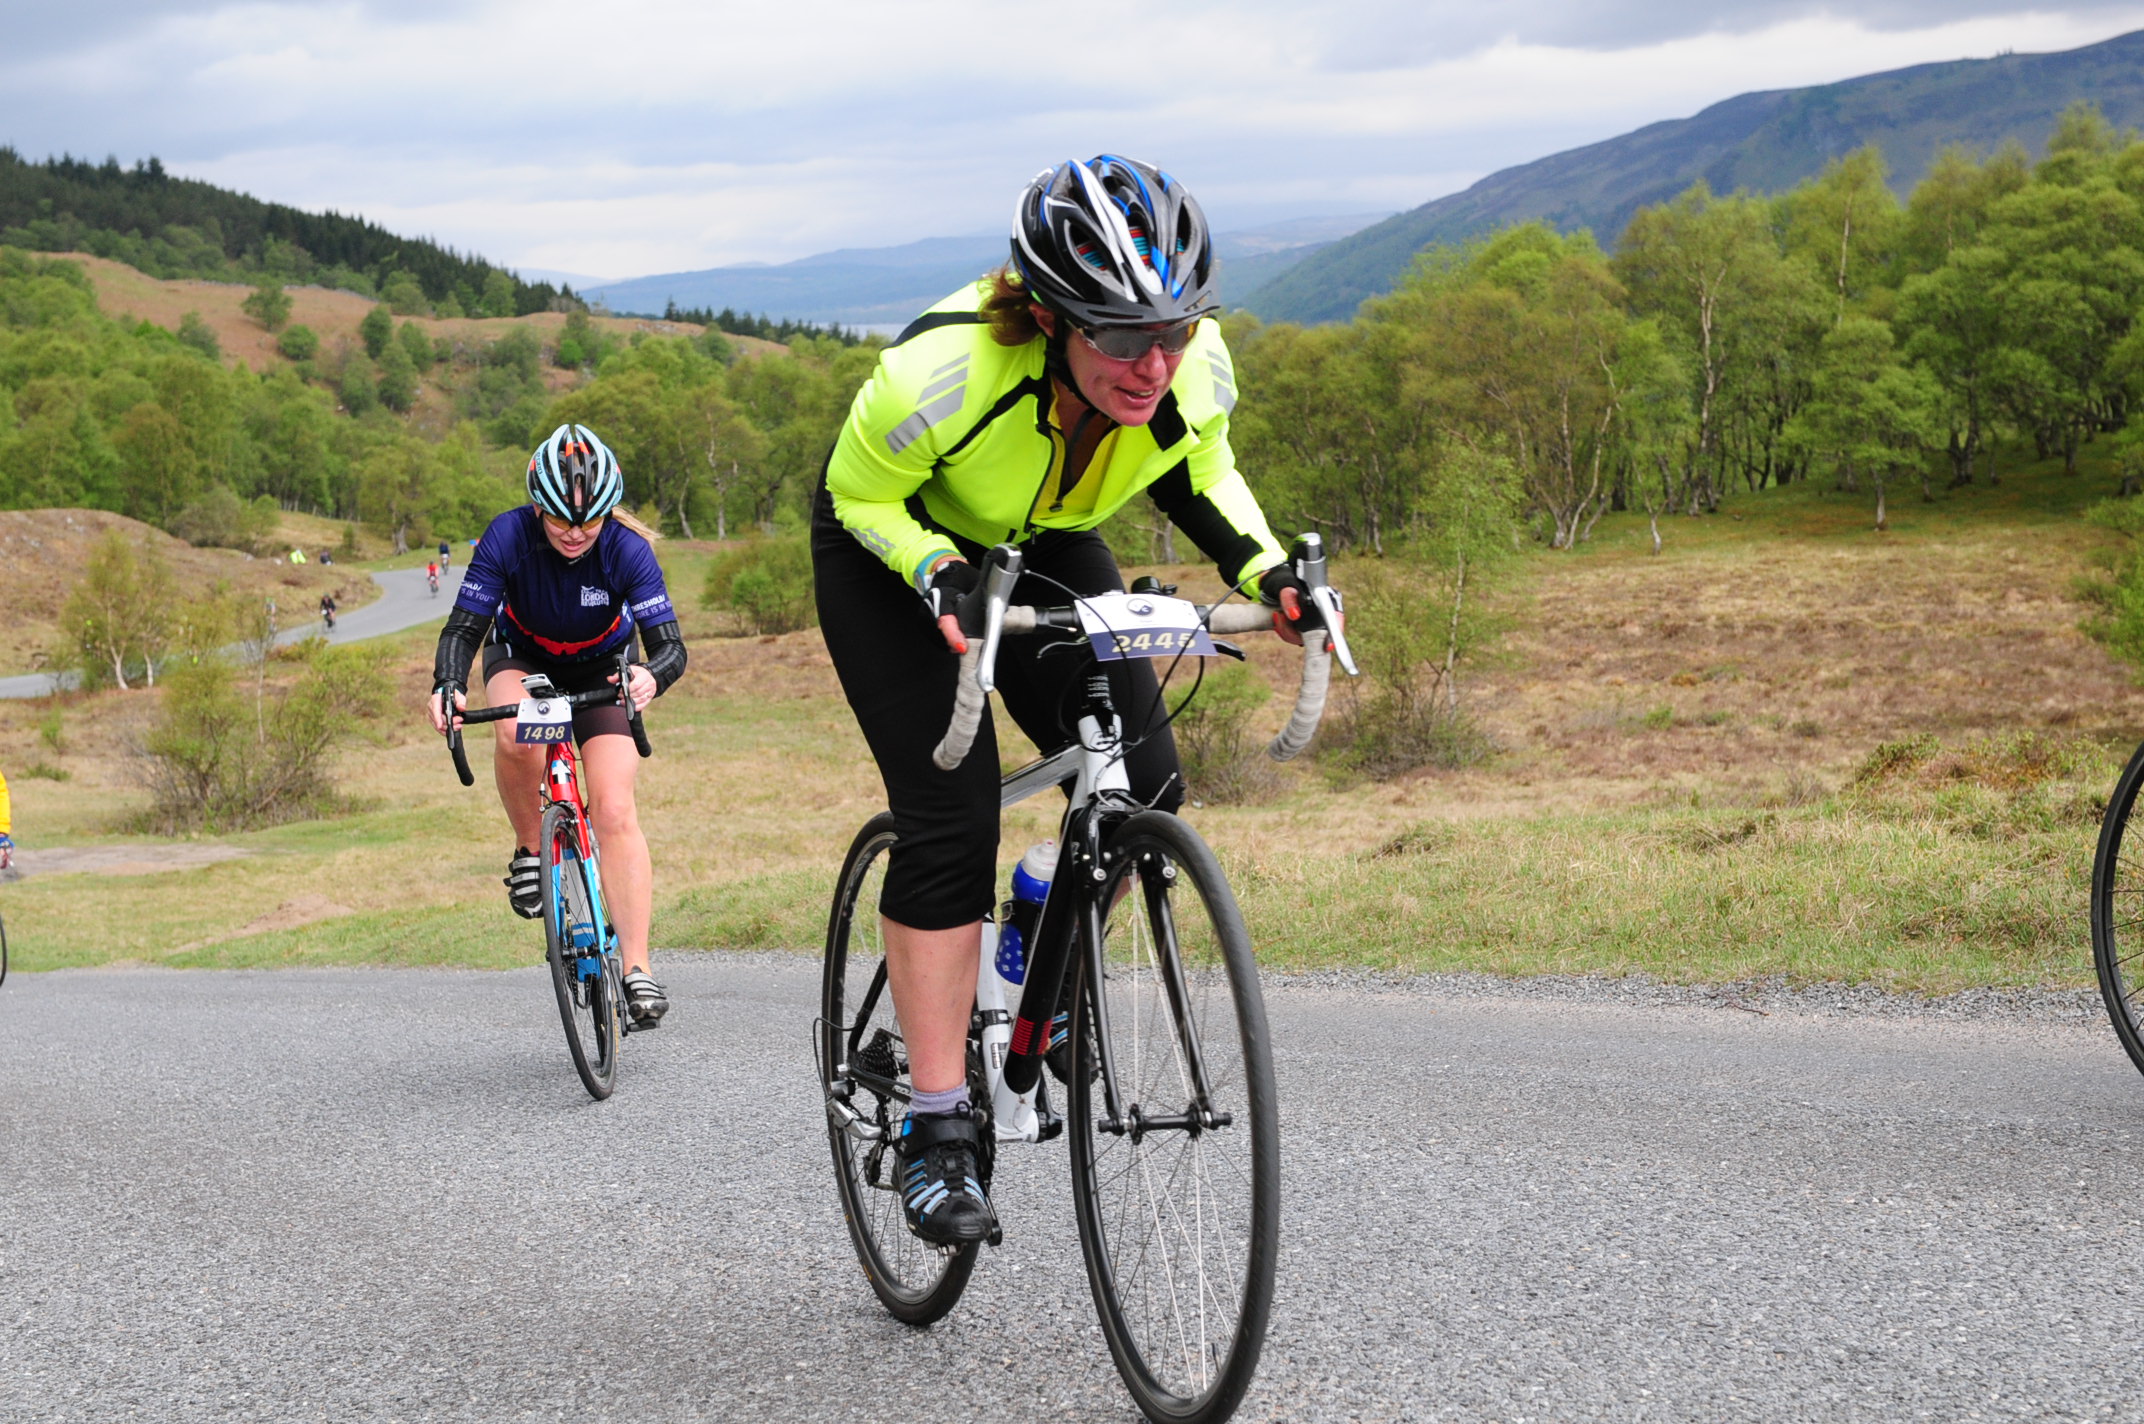 Picture shows two cyclists riding up hill